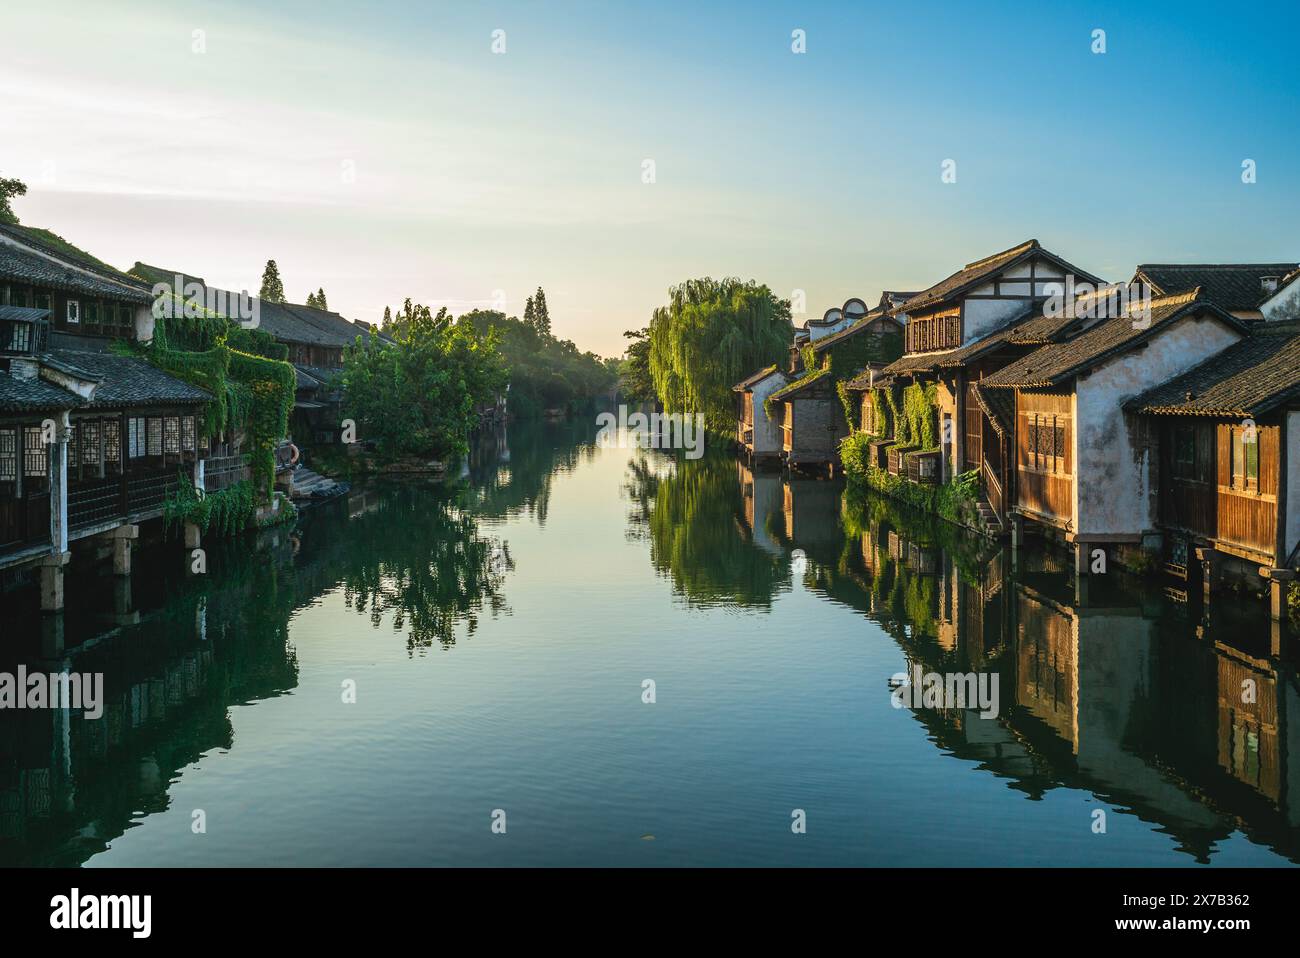 Scenery of Wuzhen, a historic scenic town in Zhejiang Province, China Stock Photo